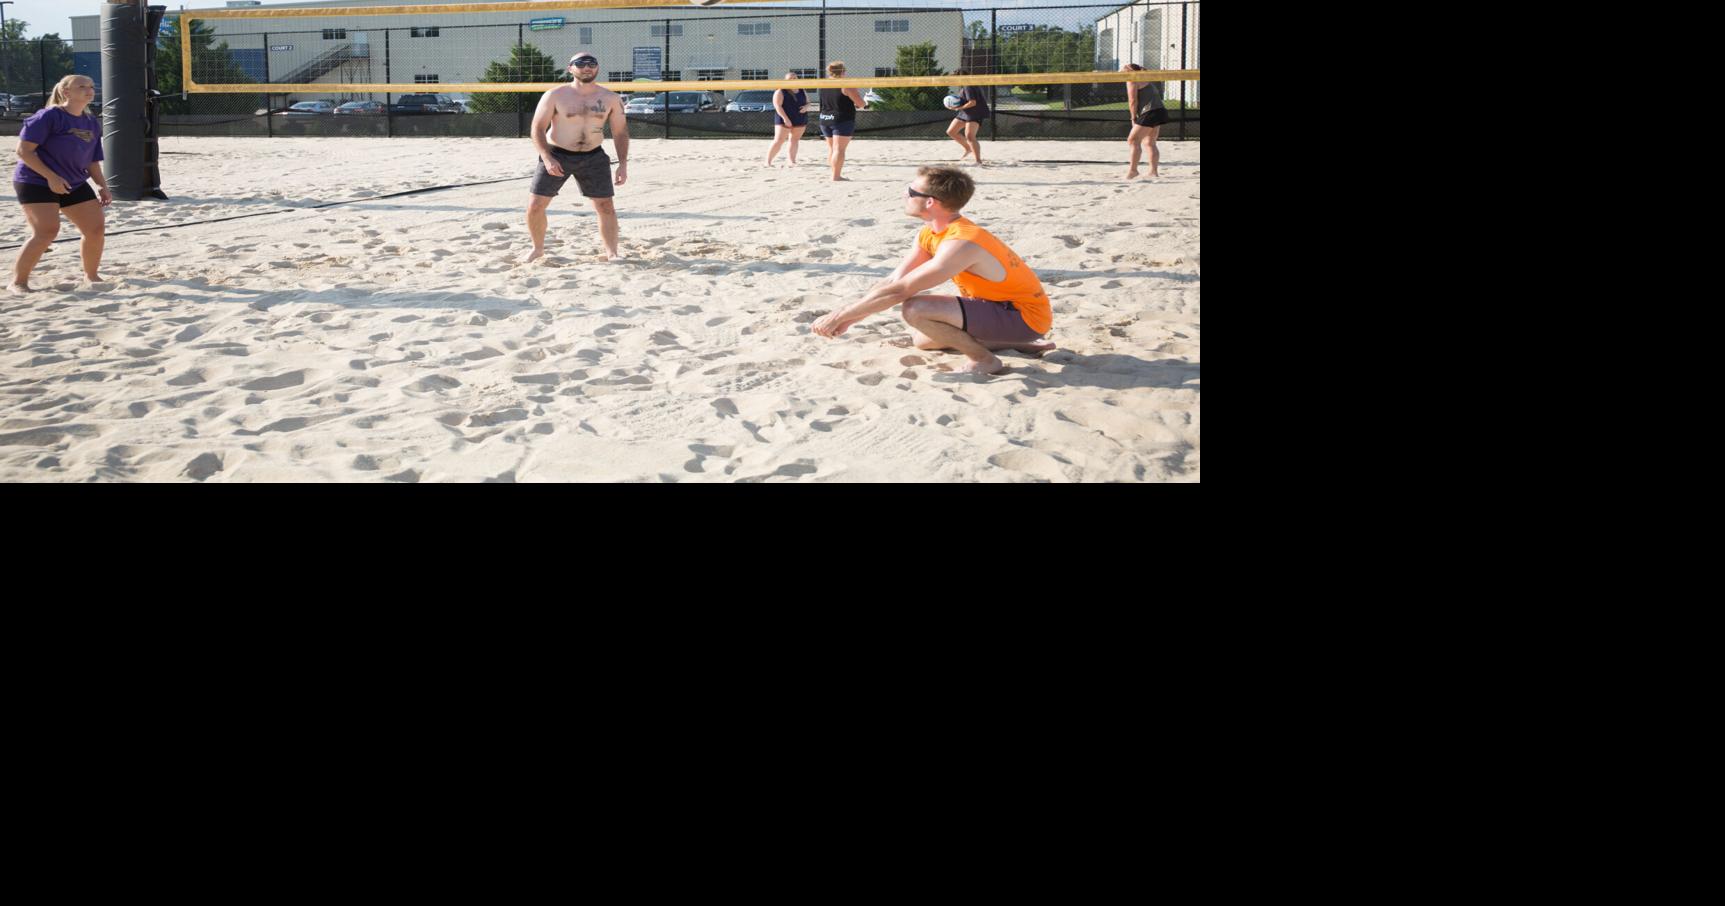 Net gain: Beach volleyball addition brings more visitors to H. Boyd Lee Park  | Local News 